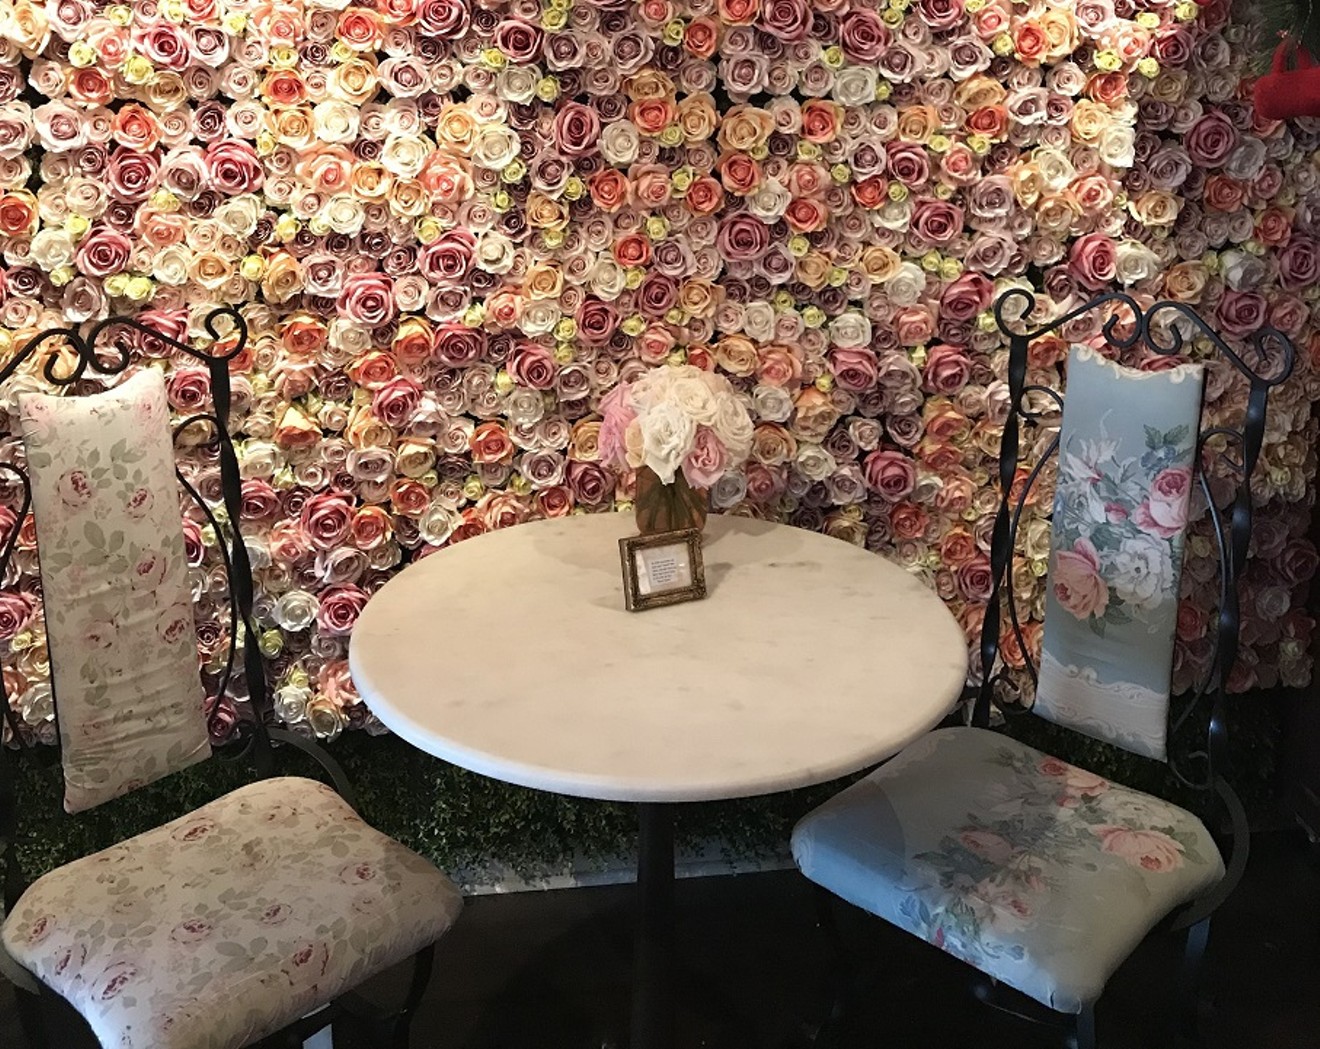 Ann's Rose Wall is a cherished staple of the Las Olas all-in-one coffee, wine, and flower shop.